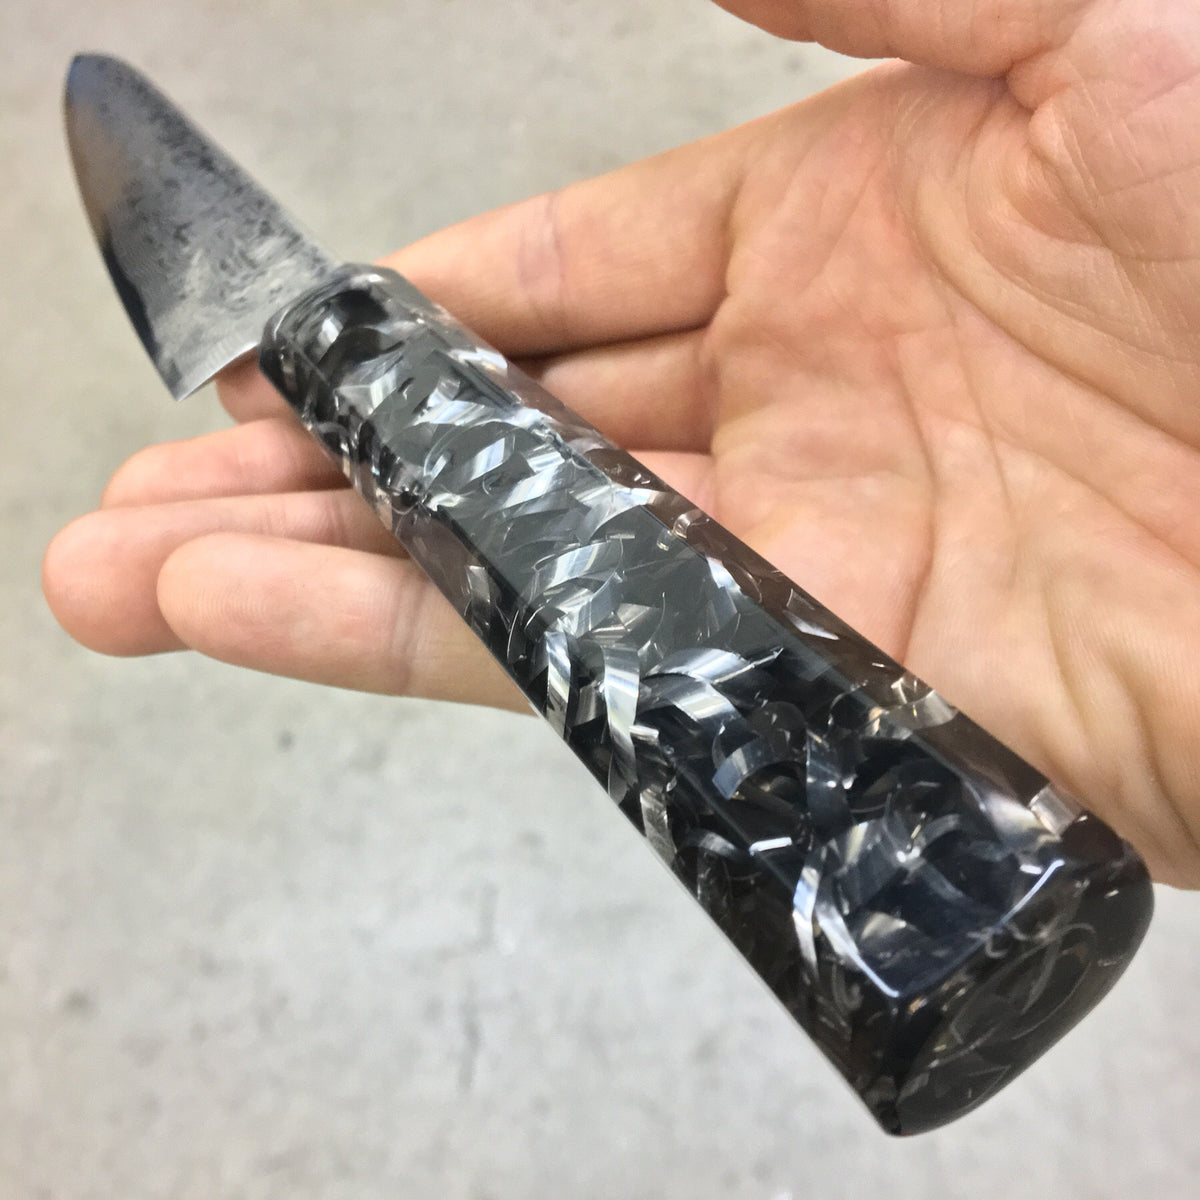 Curly Fries of Steel - 6in Damascus Petty Culinary Knife